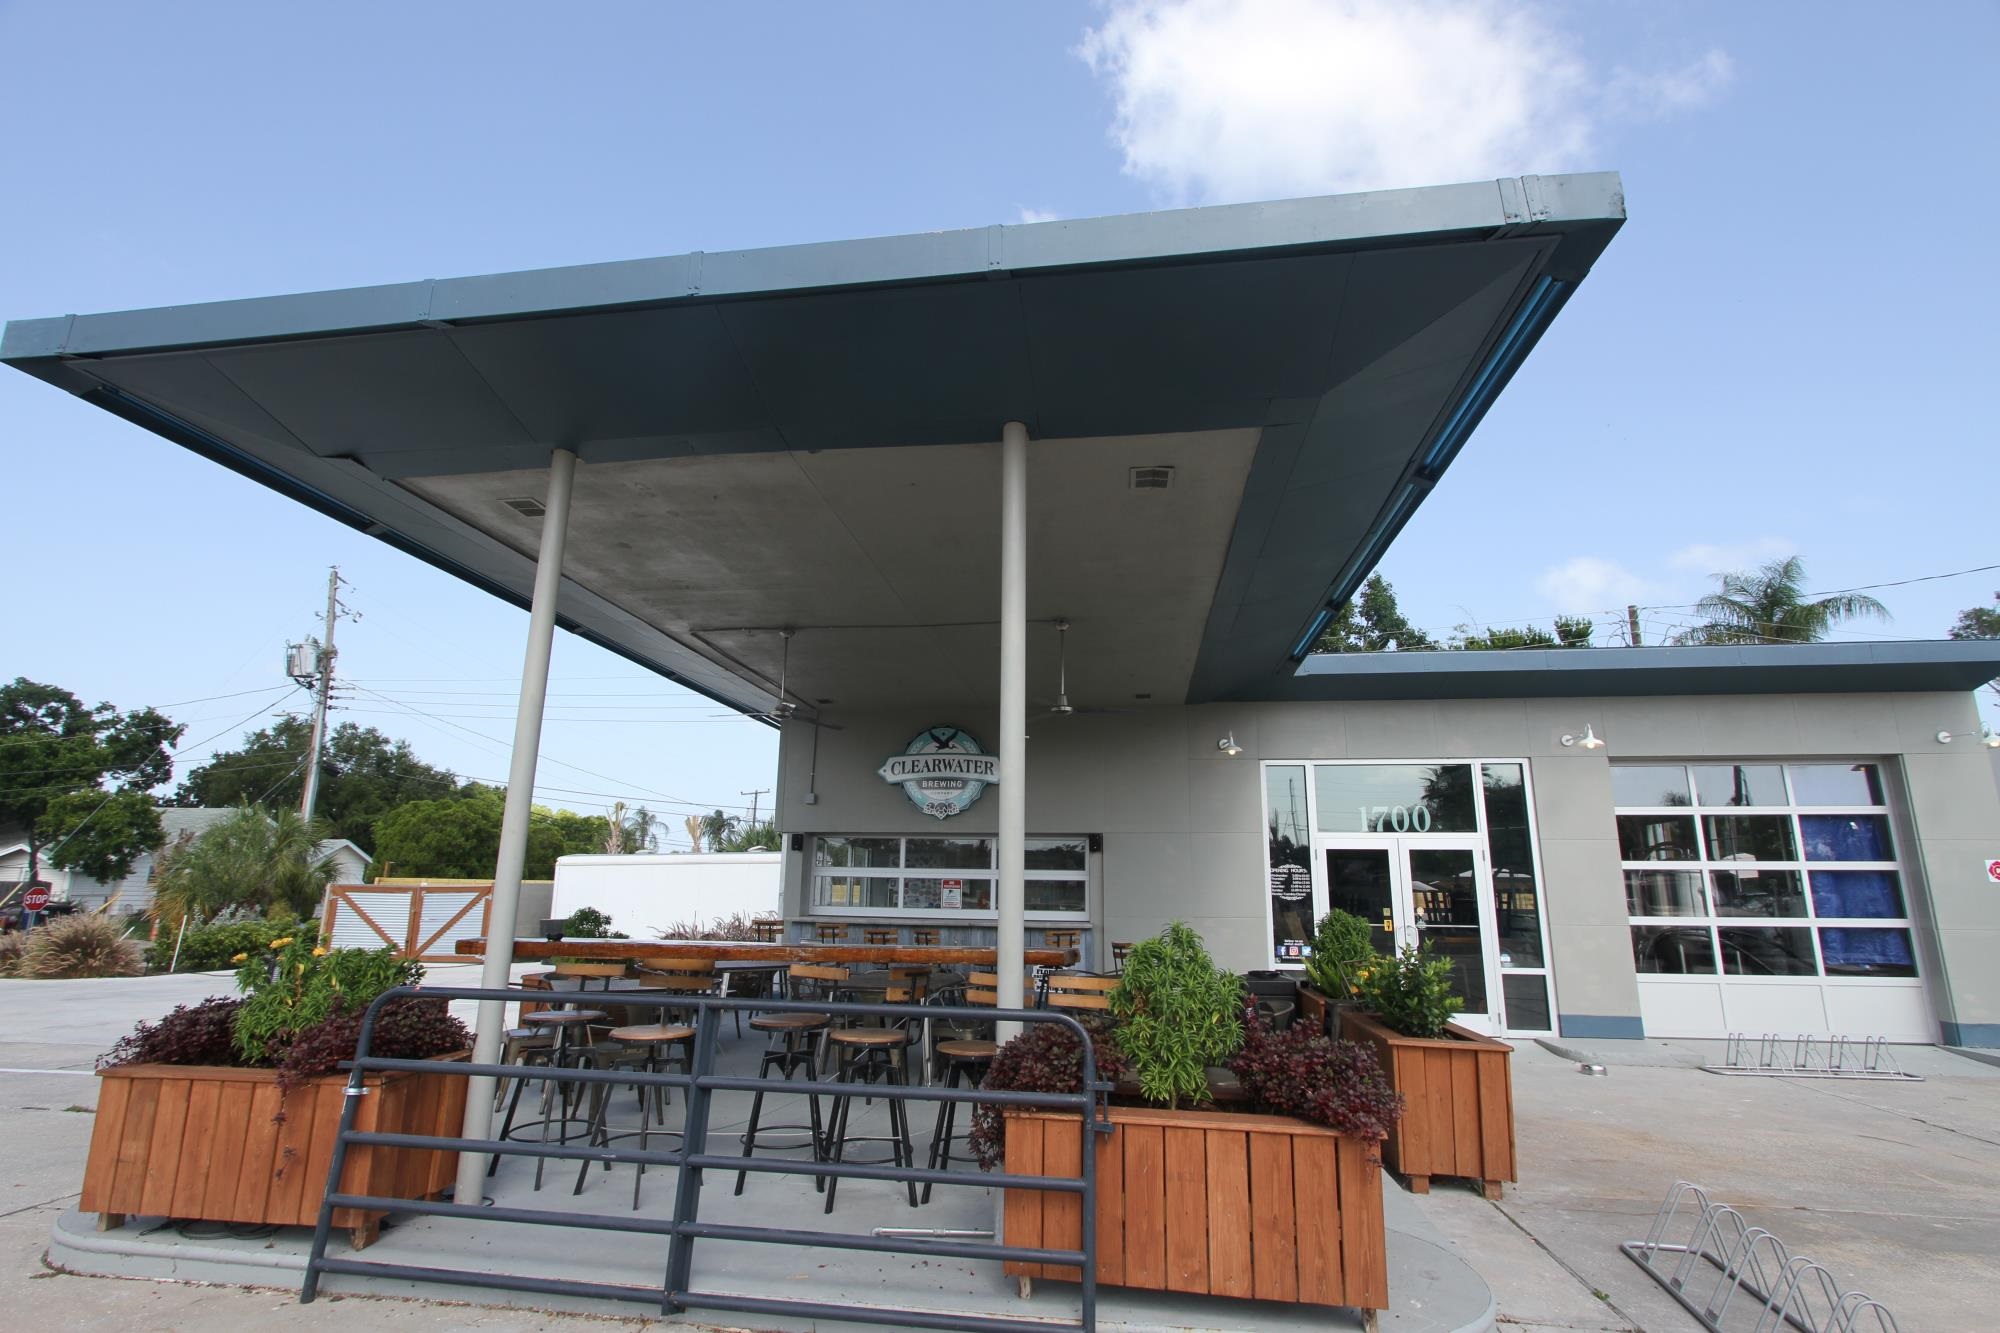 Awning over outdoor seating